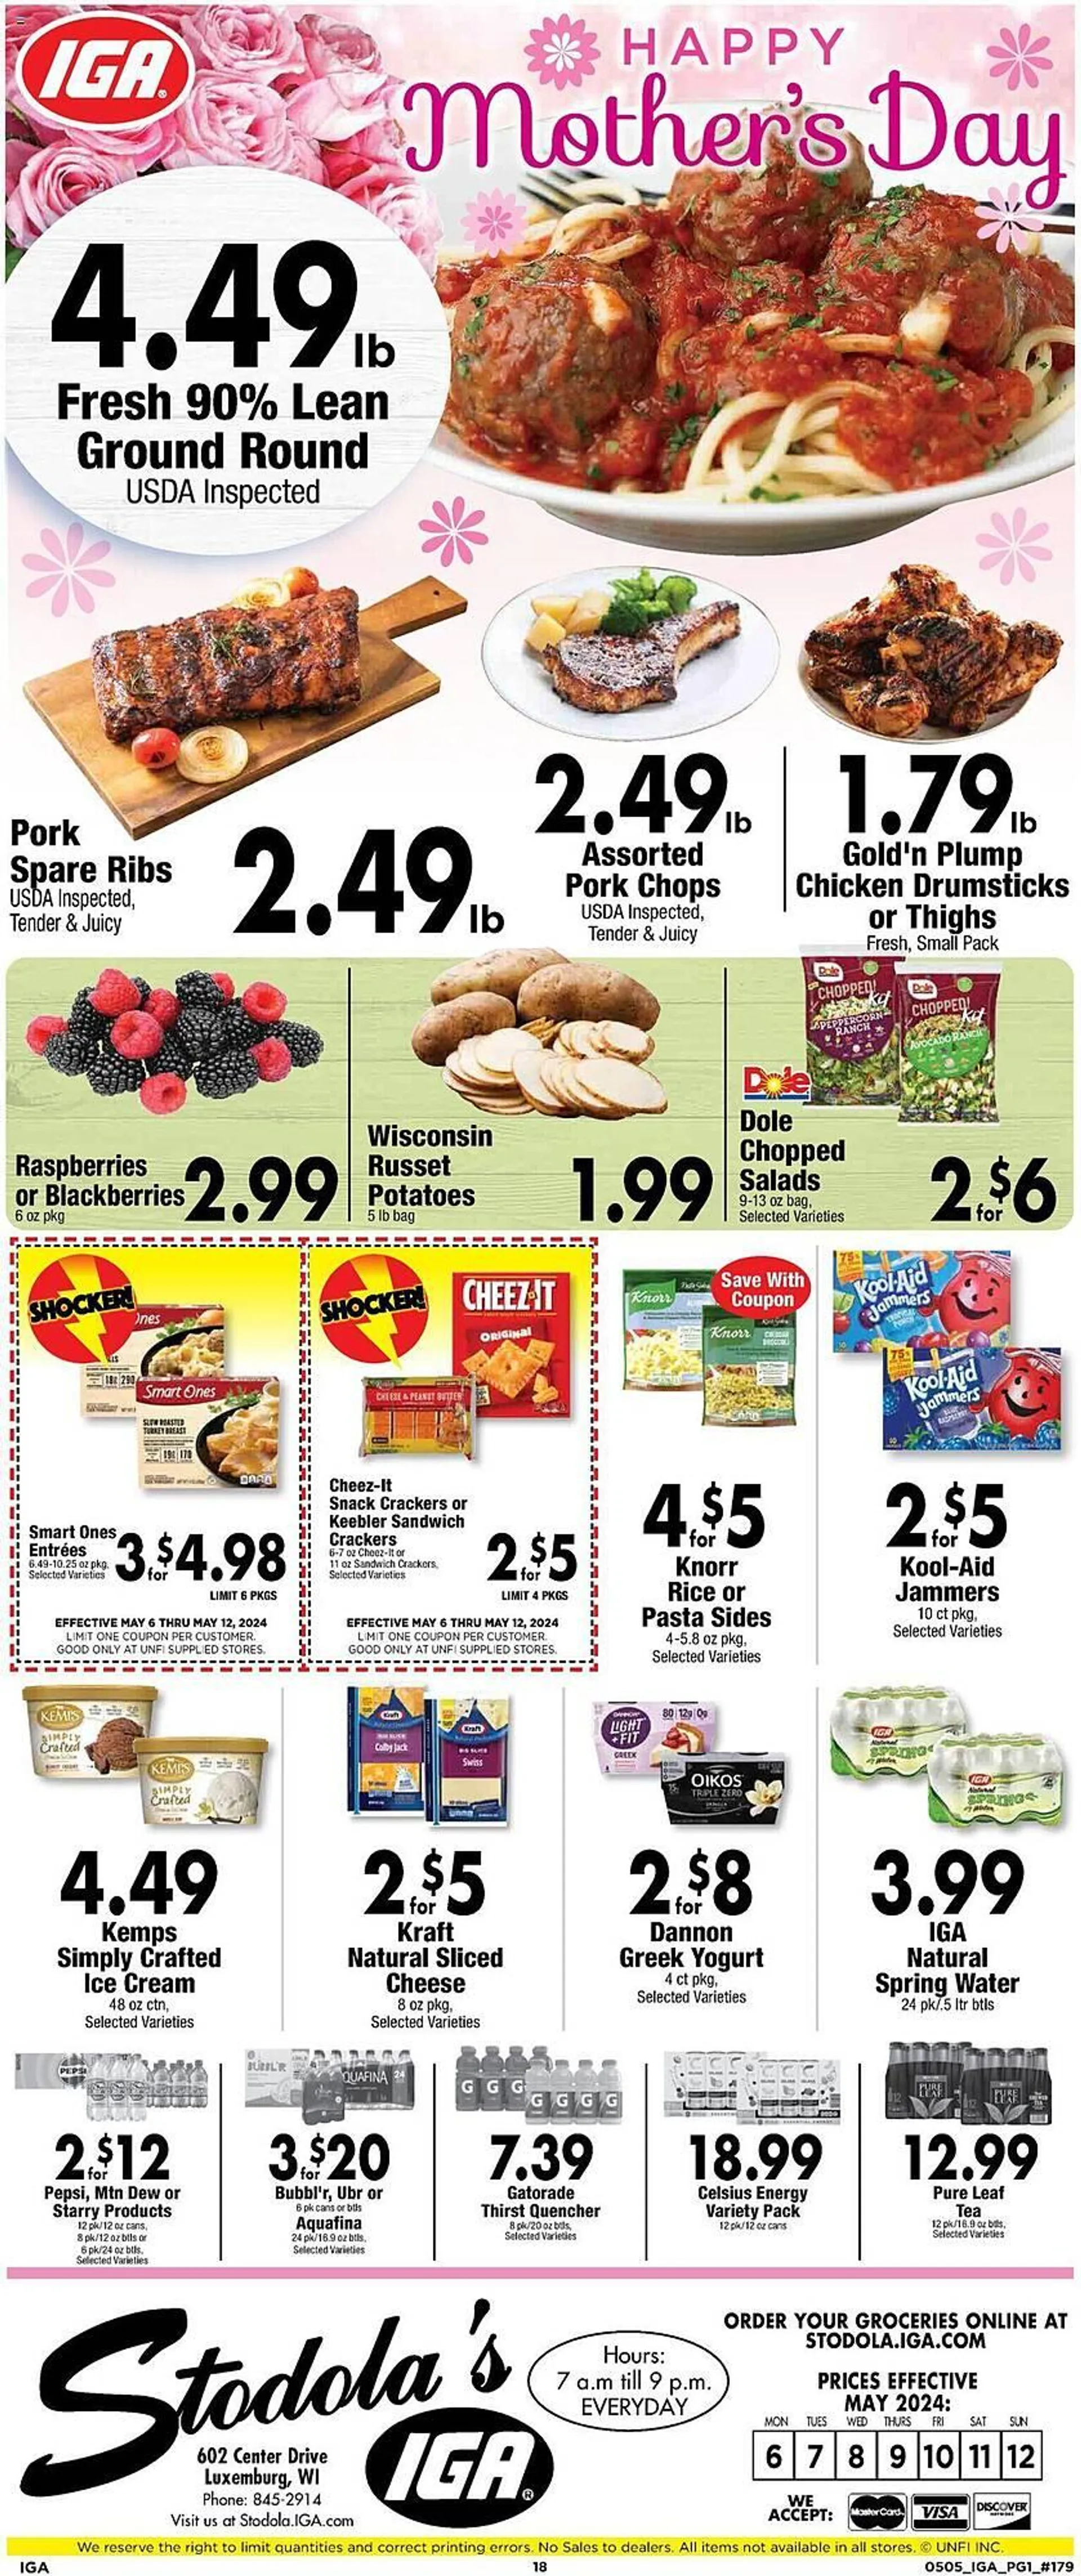 Festival Foods Weekly Ad - 1